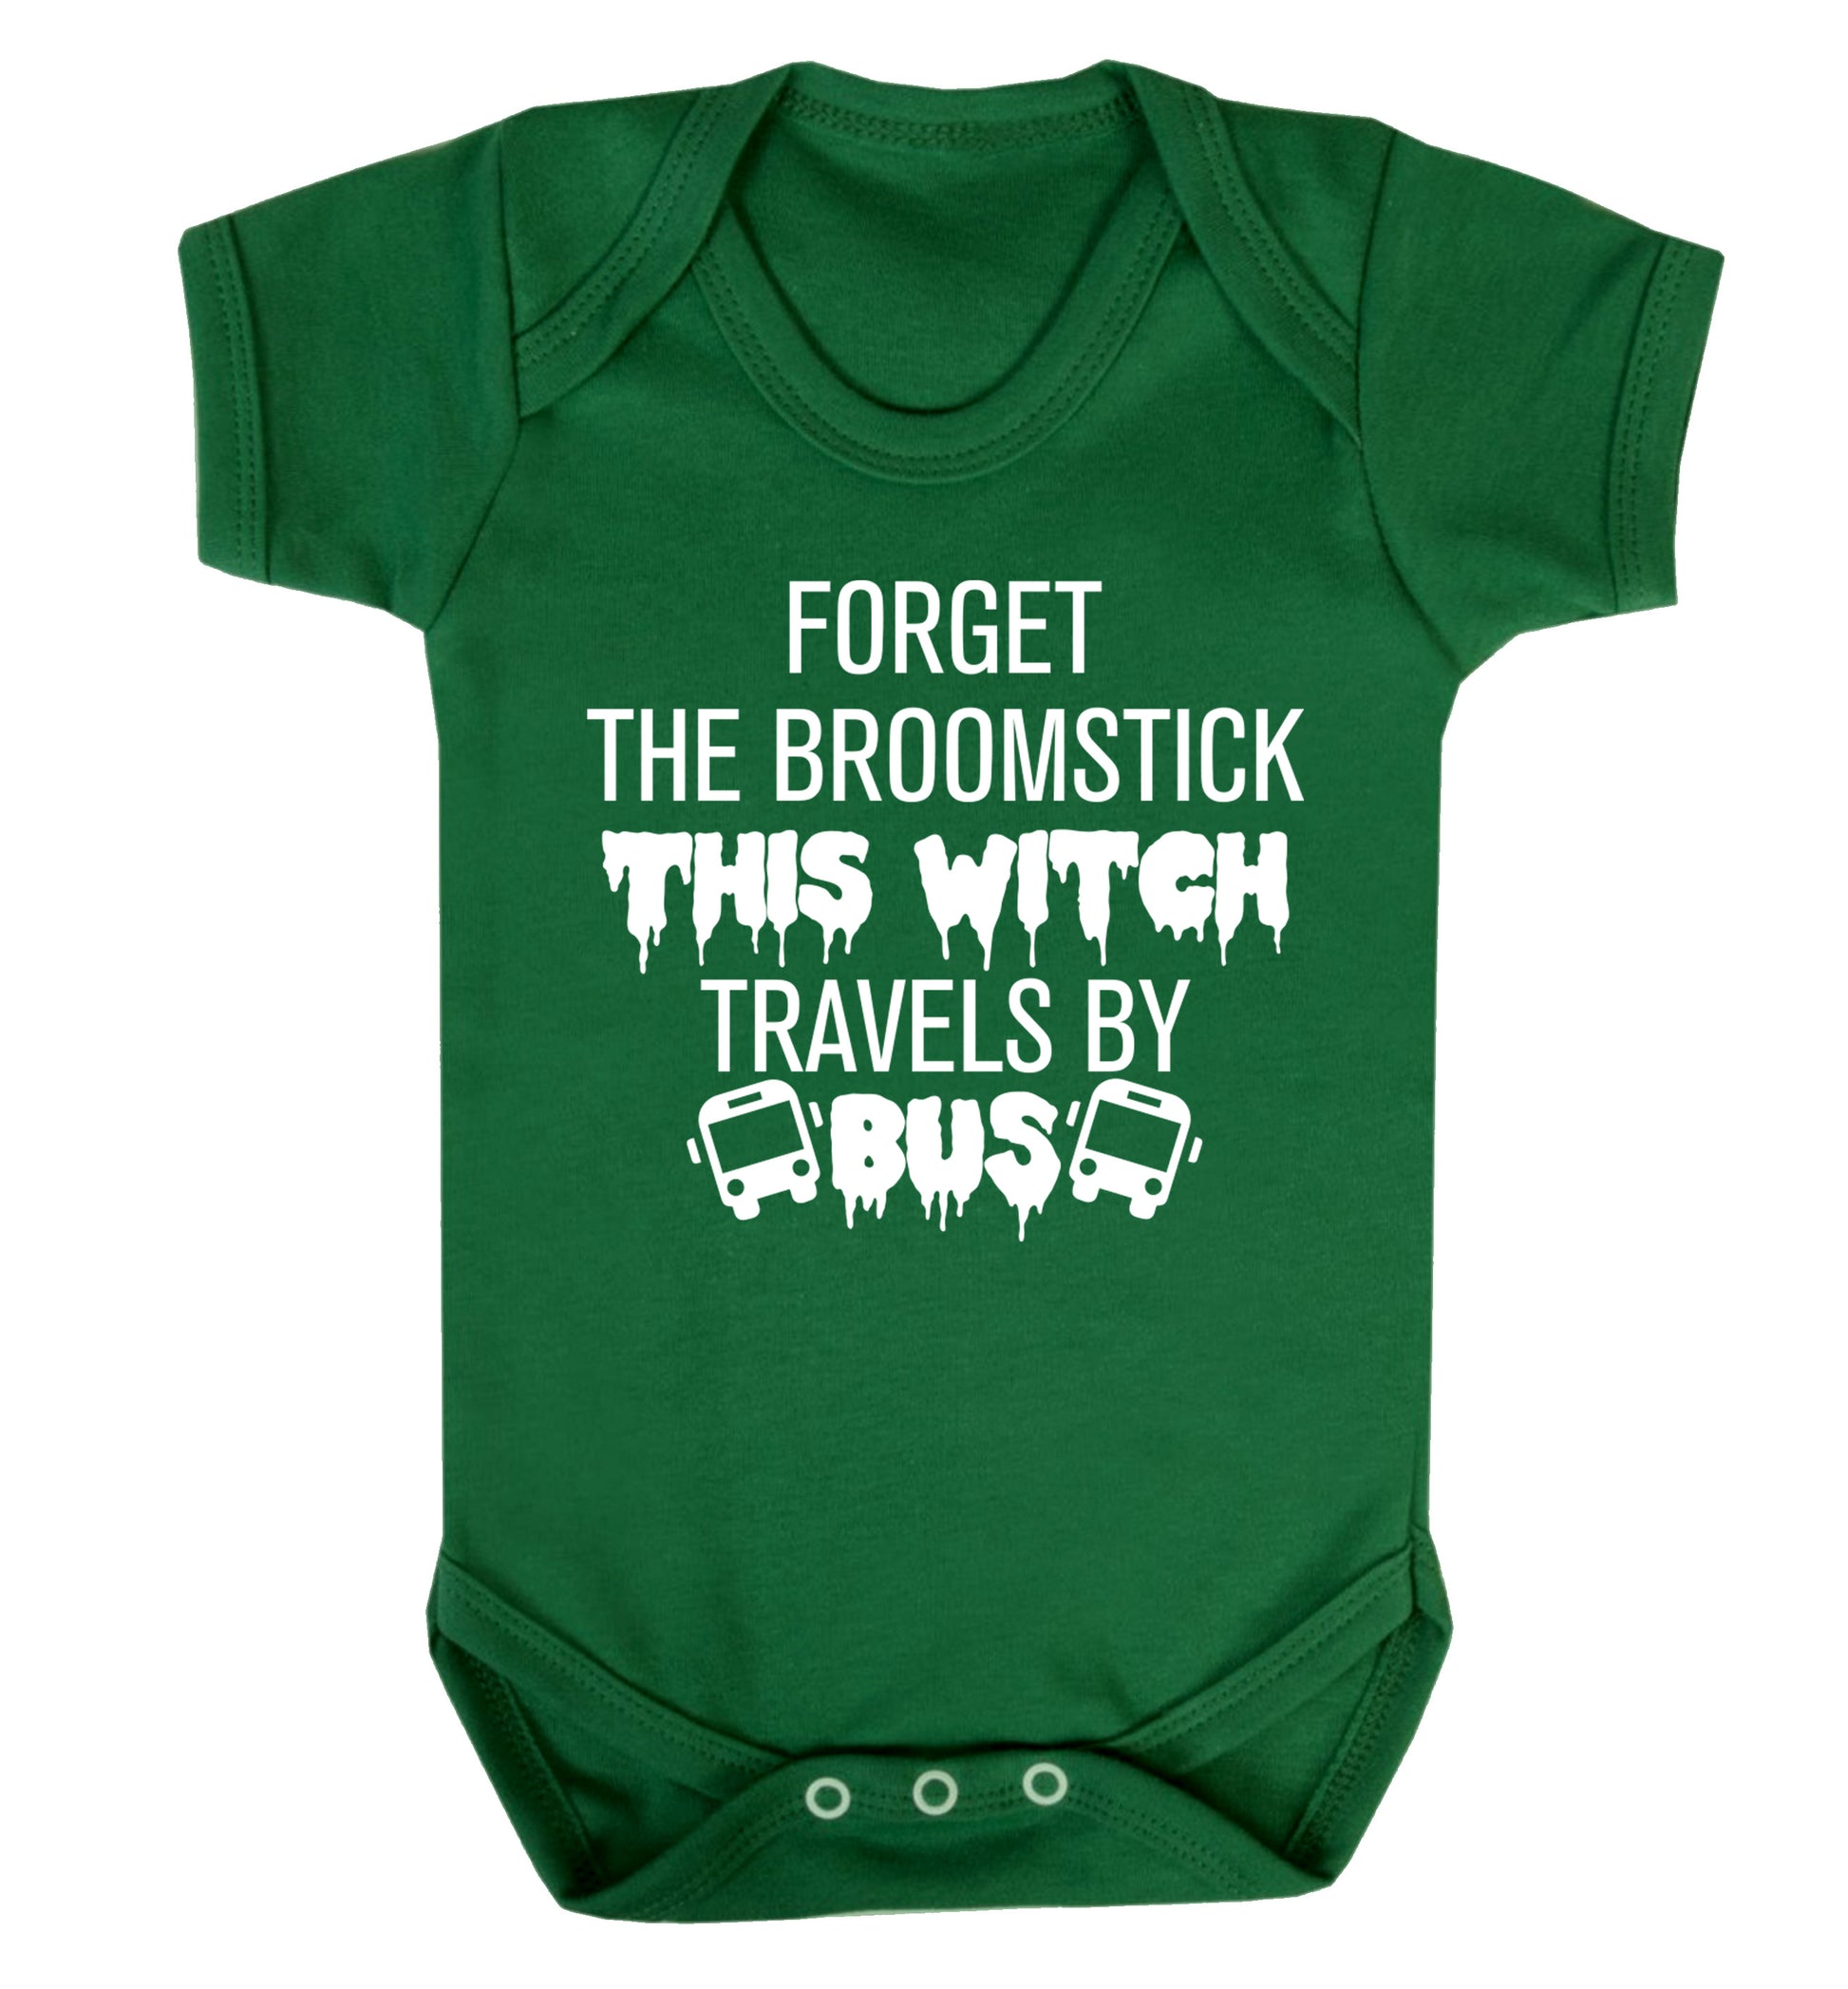 Forget the broomstick this witch travels by bus Baby Vest green 18-24 months